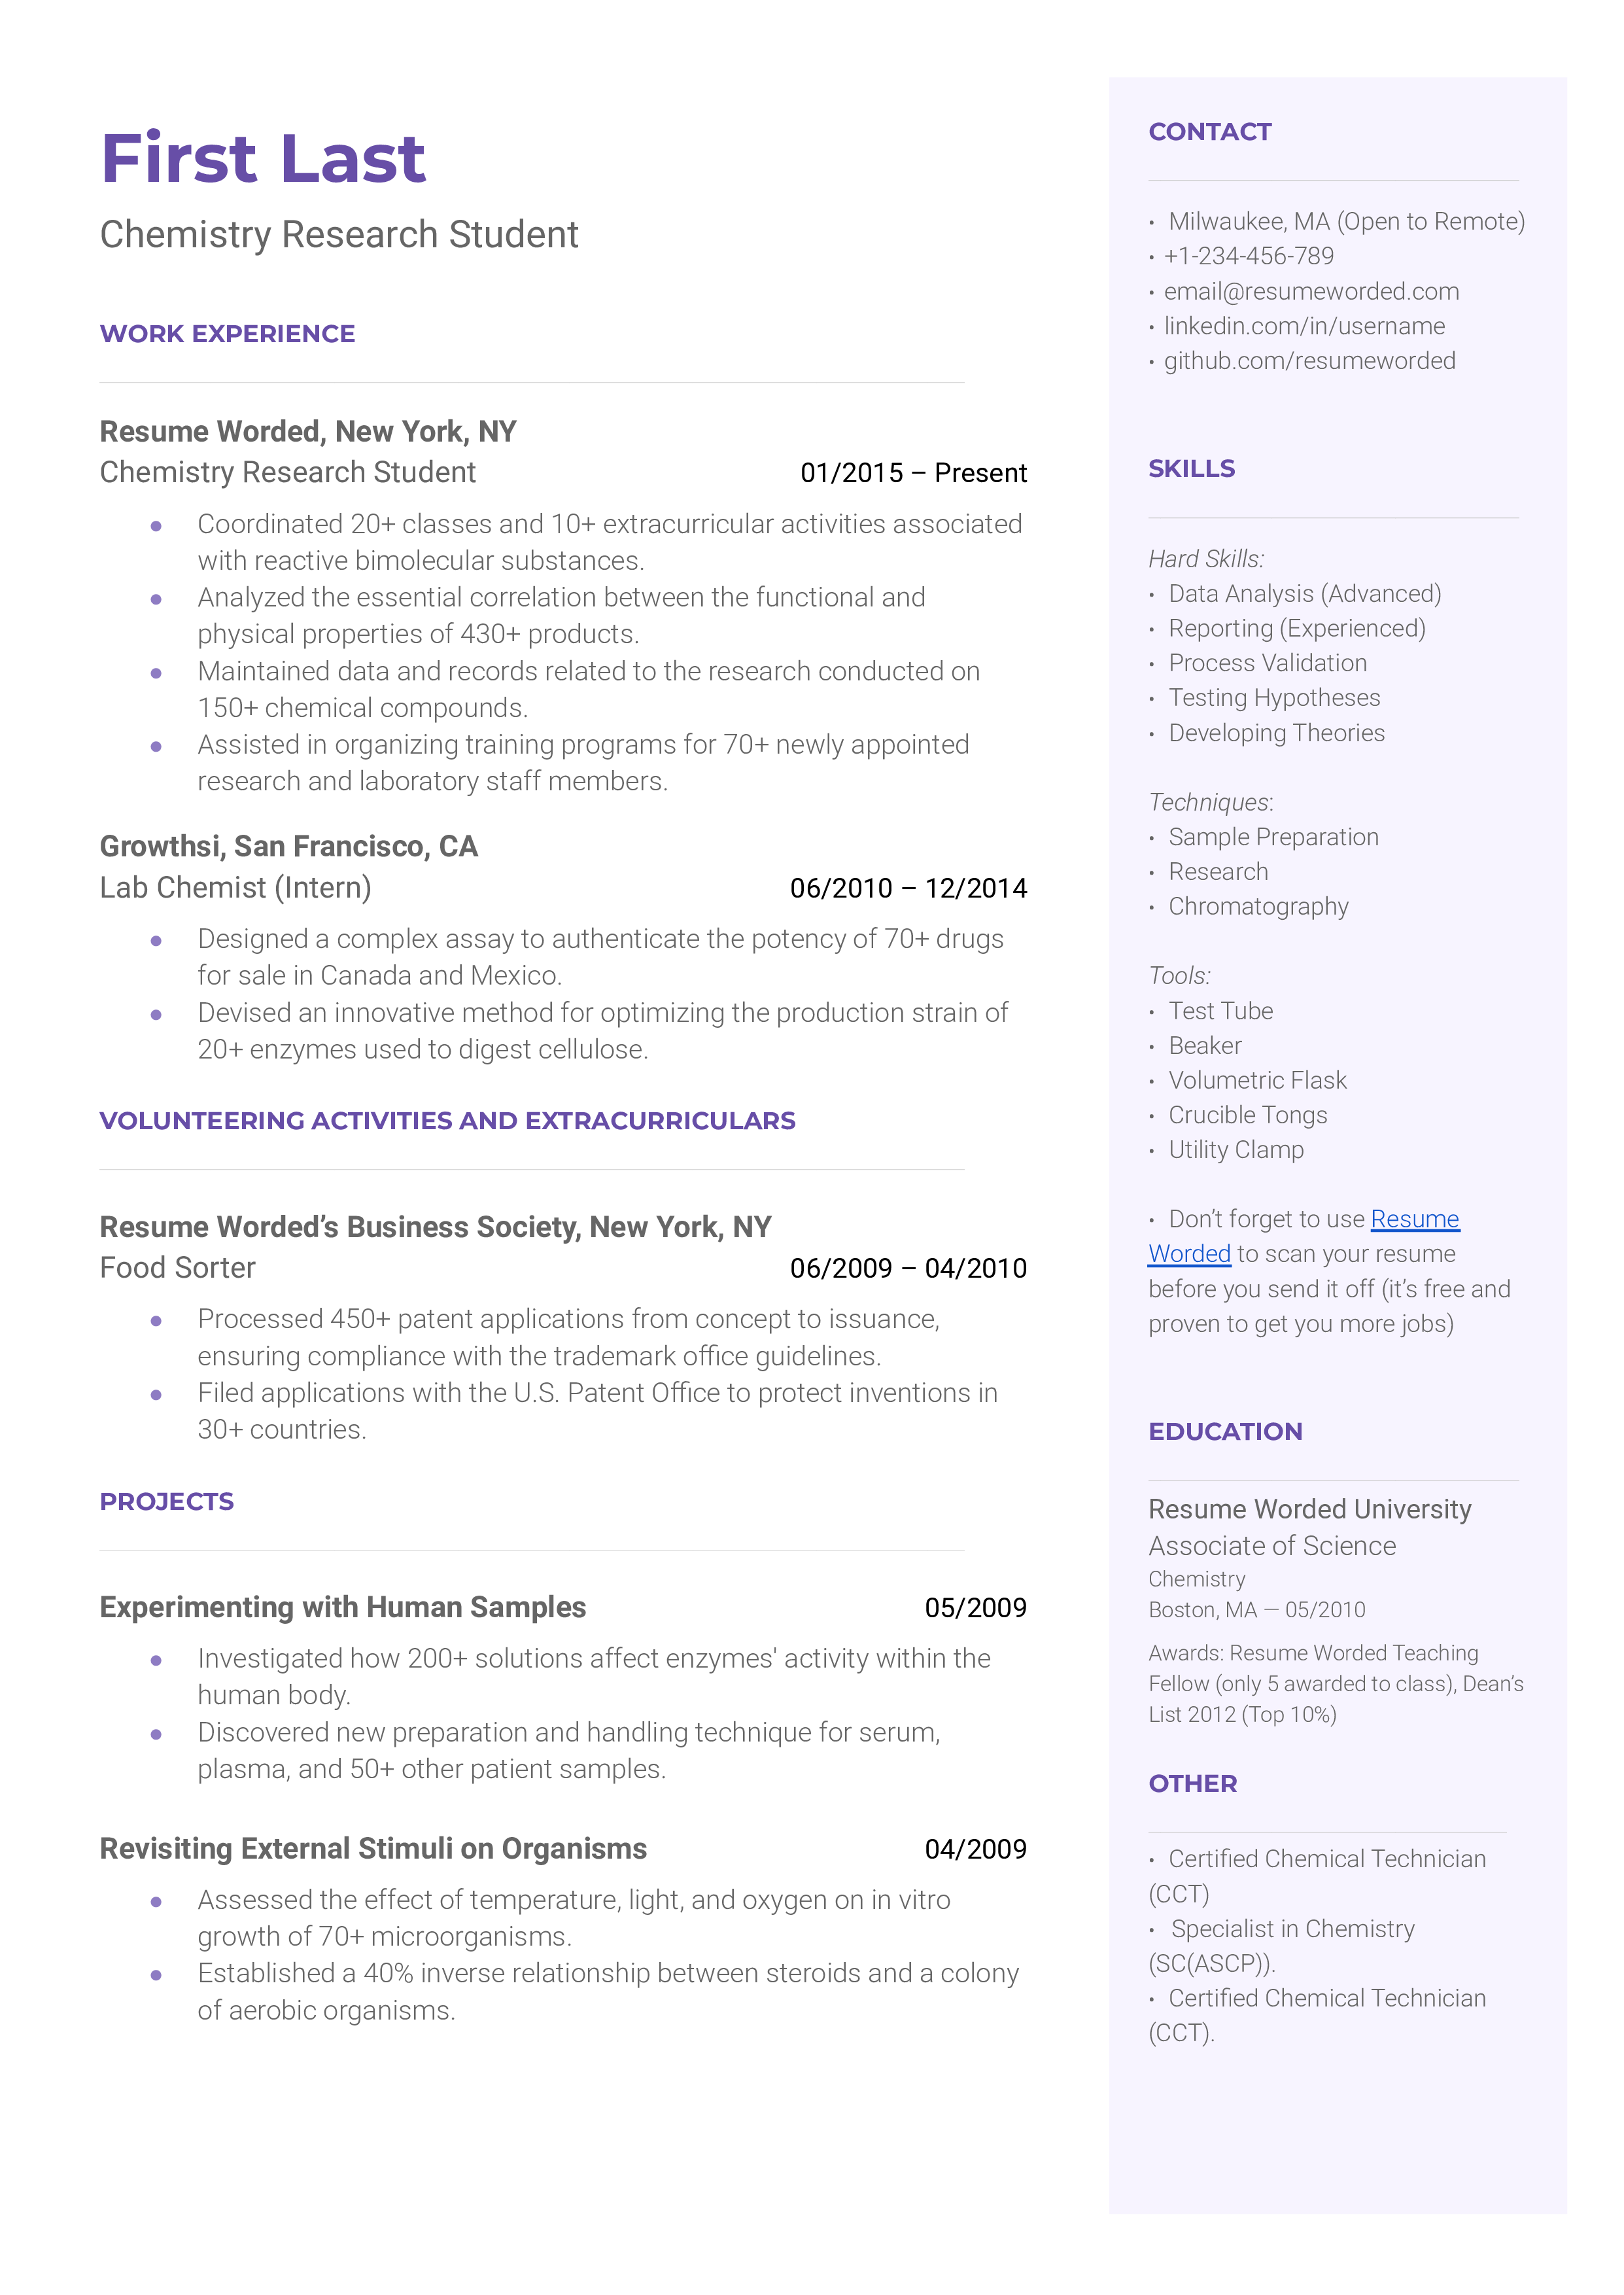 A resume for a chemistry research student with a bachelor's degree in chemistry and experience as a graudate research assistant.